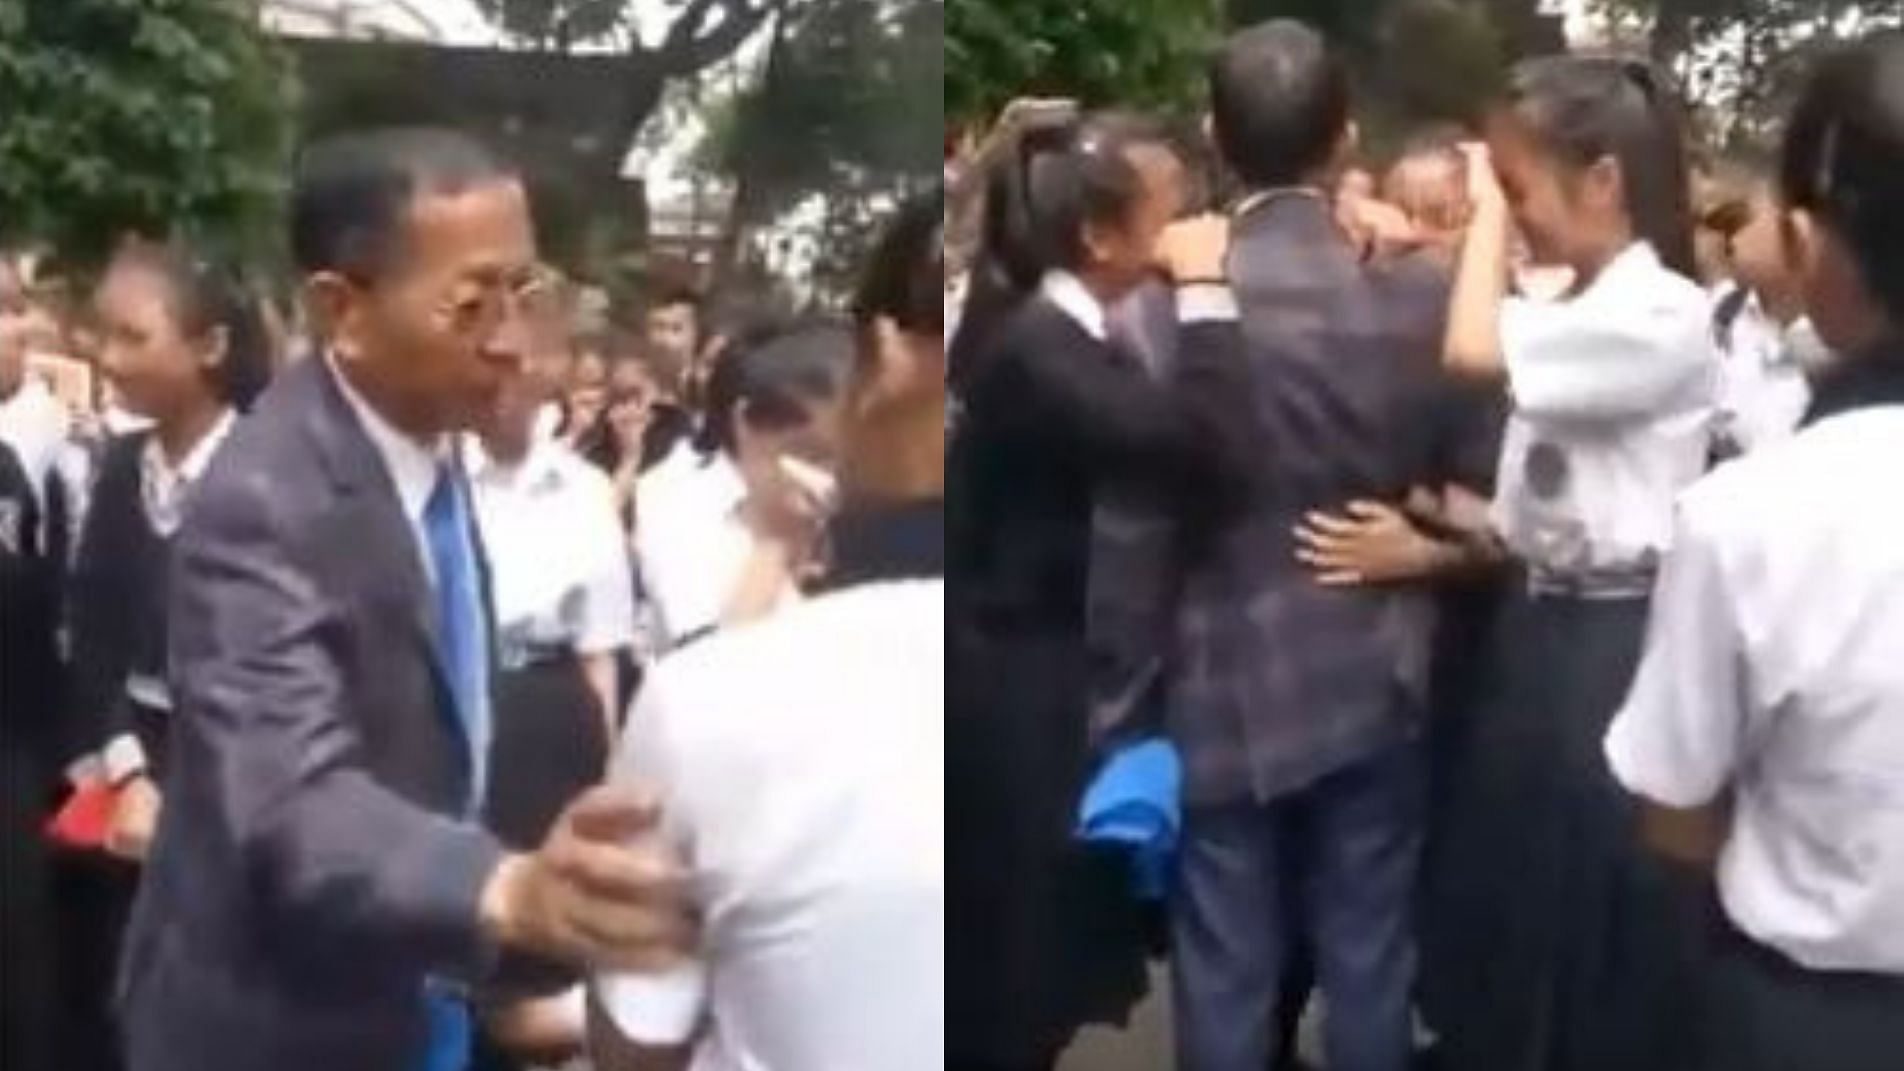 The video is <a href="https://www.news18.com/news/buzz/strict-headmaster-gets-emotional-after-receiving-heartbreaking-farewell-from-students-in-mizoram-2195305.html">reportedly</a> from a school in Mizoram where students were bidding farewell to their beloved headmaster.